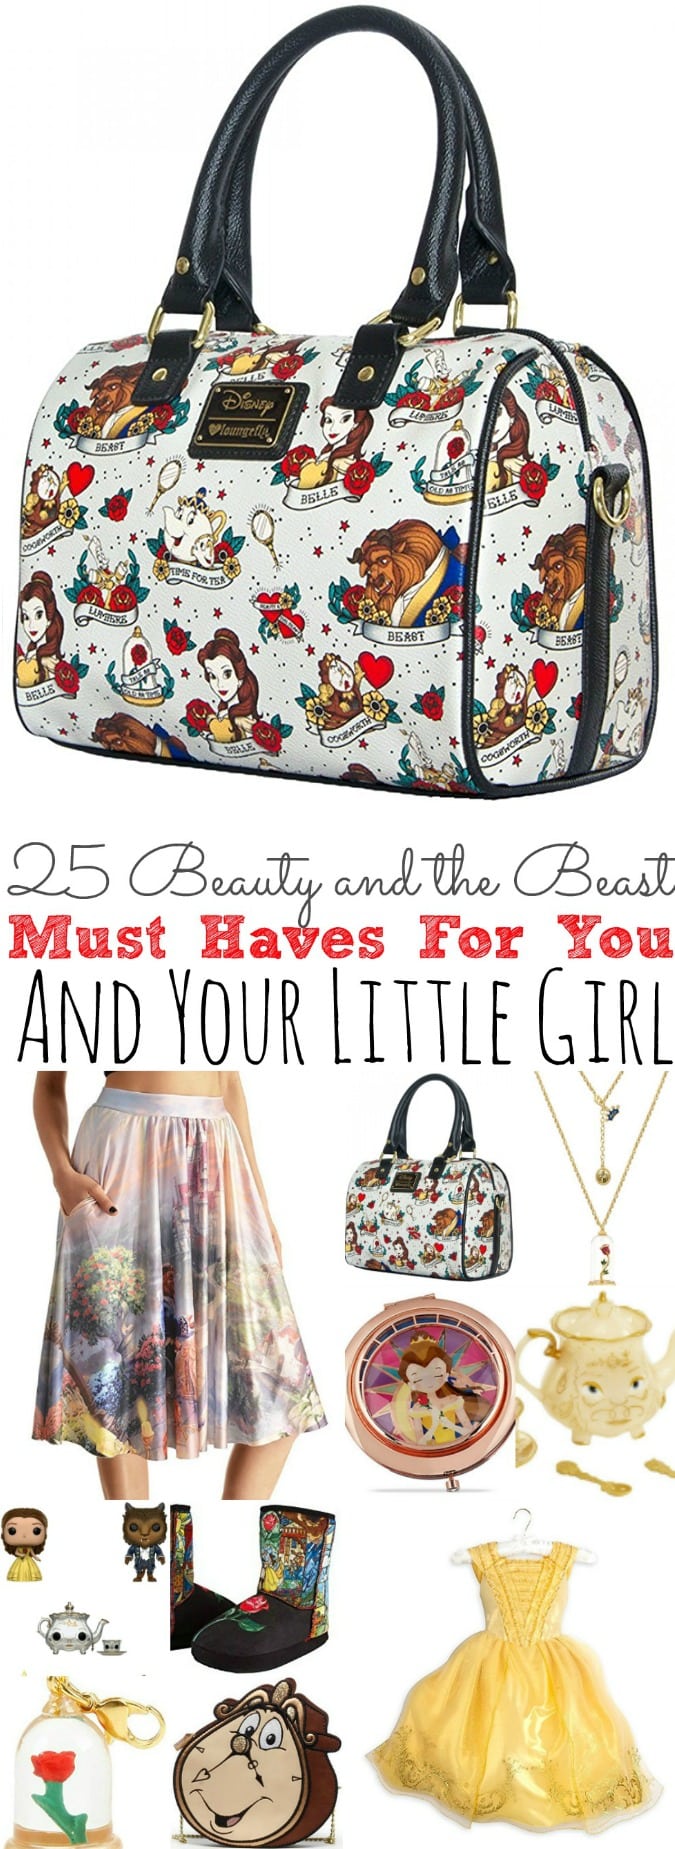 25 Beauty and the Beast Must Haves For You and Your Little Girl